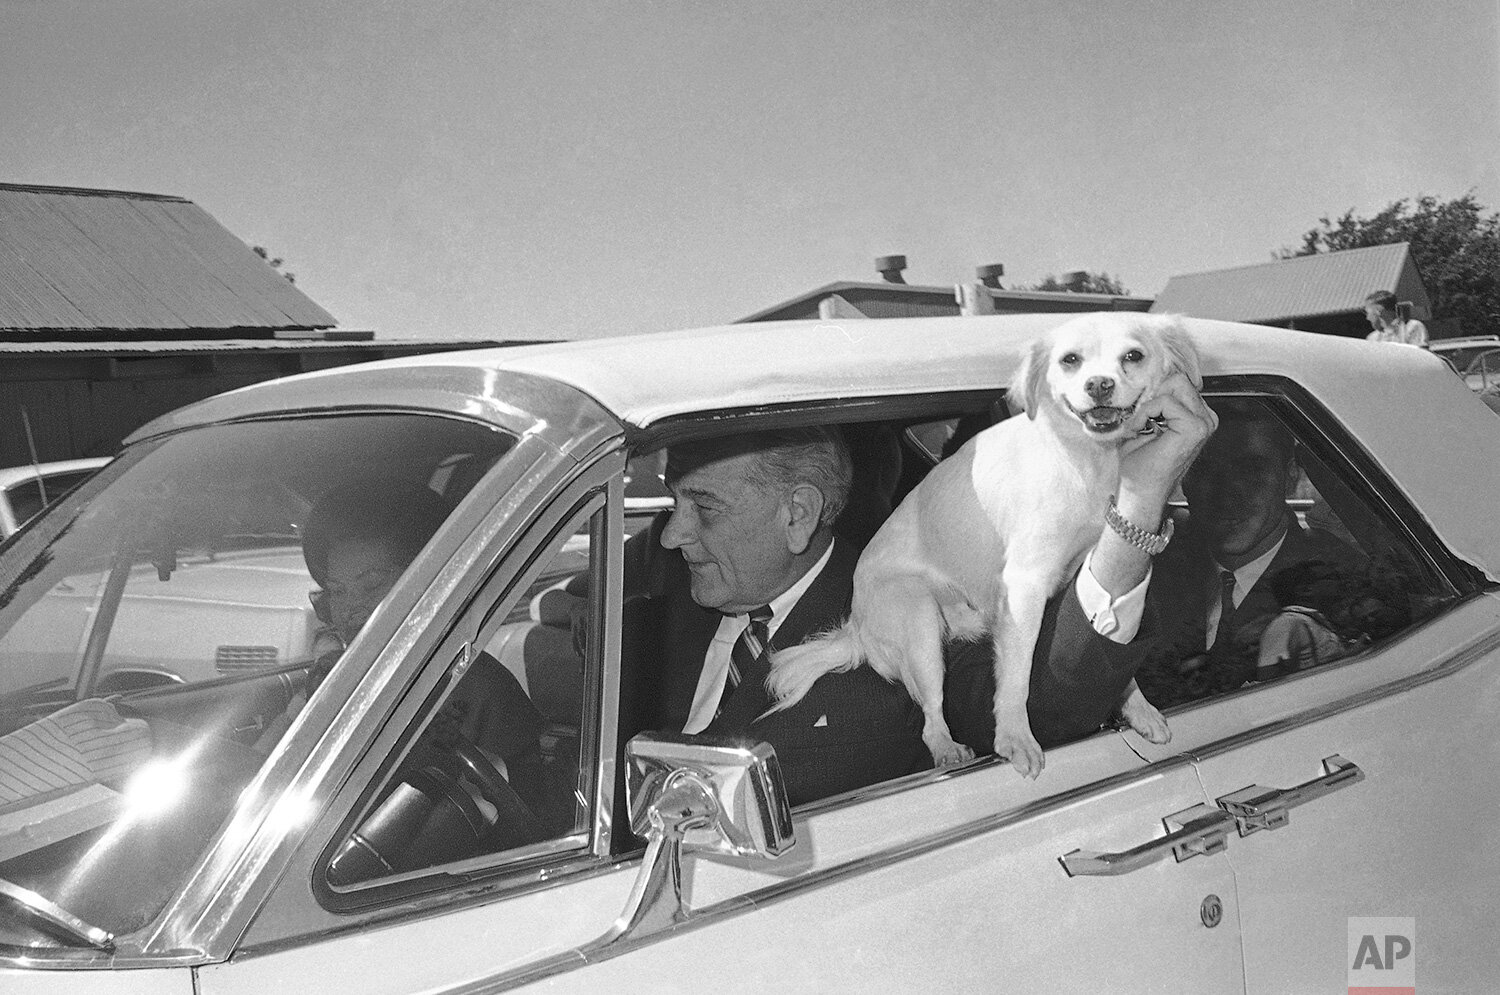  Yuki, President Lyndon Johnson’s pet mongrel, is held at the window of the car as the first family starts a ride around the ranch in Stonewall, Texas, Sept. 30, 1967. (AP Photo) 